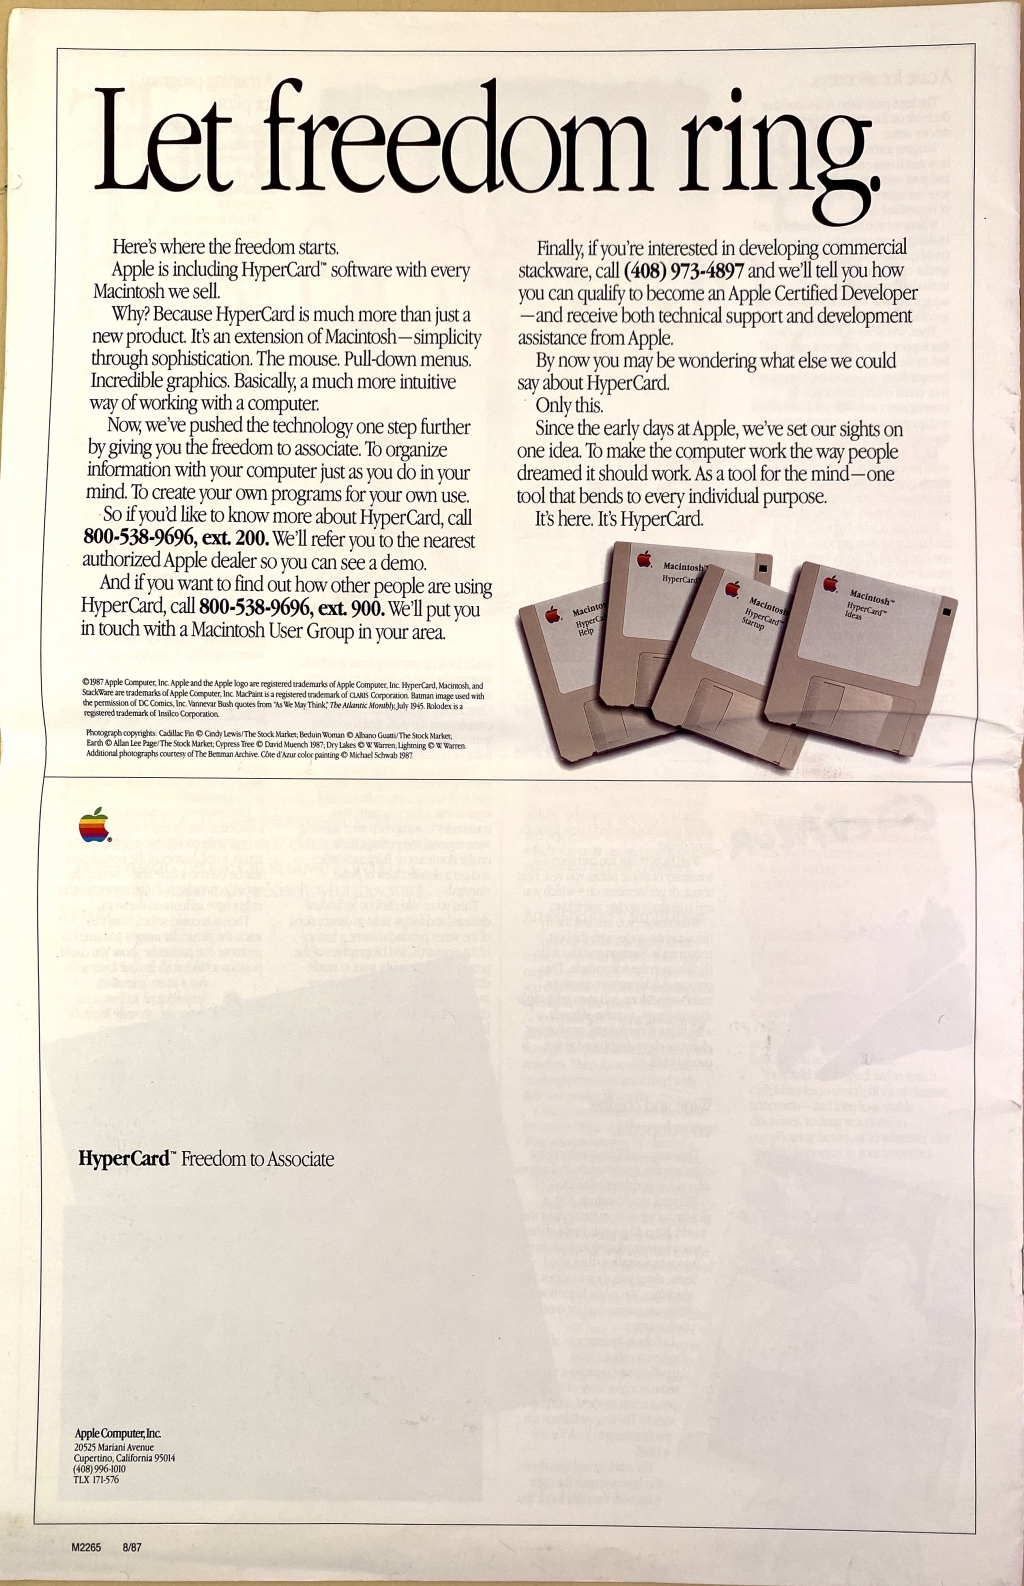 Final page of the first Hypercard brochure.  The date 8/87 is visible in the lower left corner.